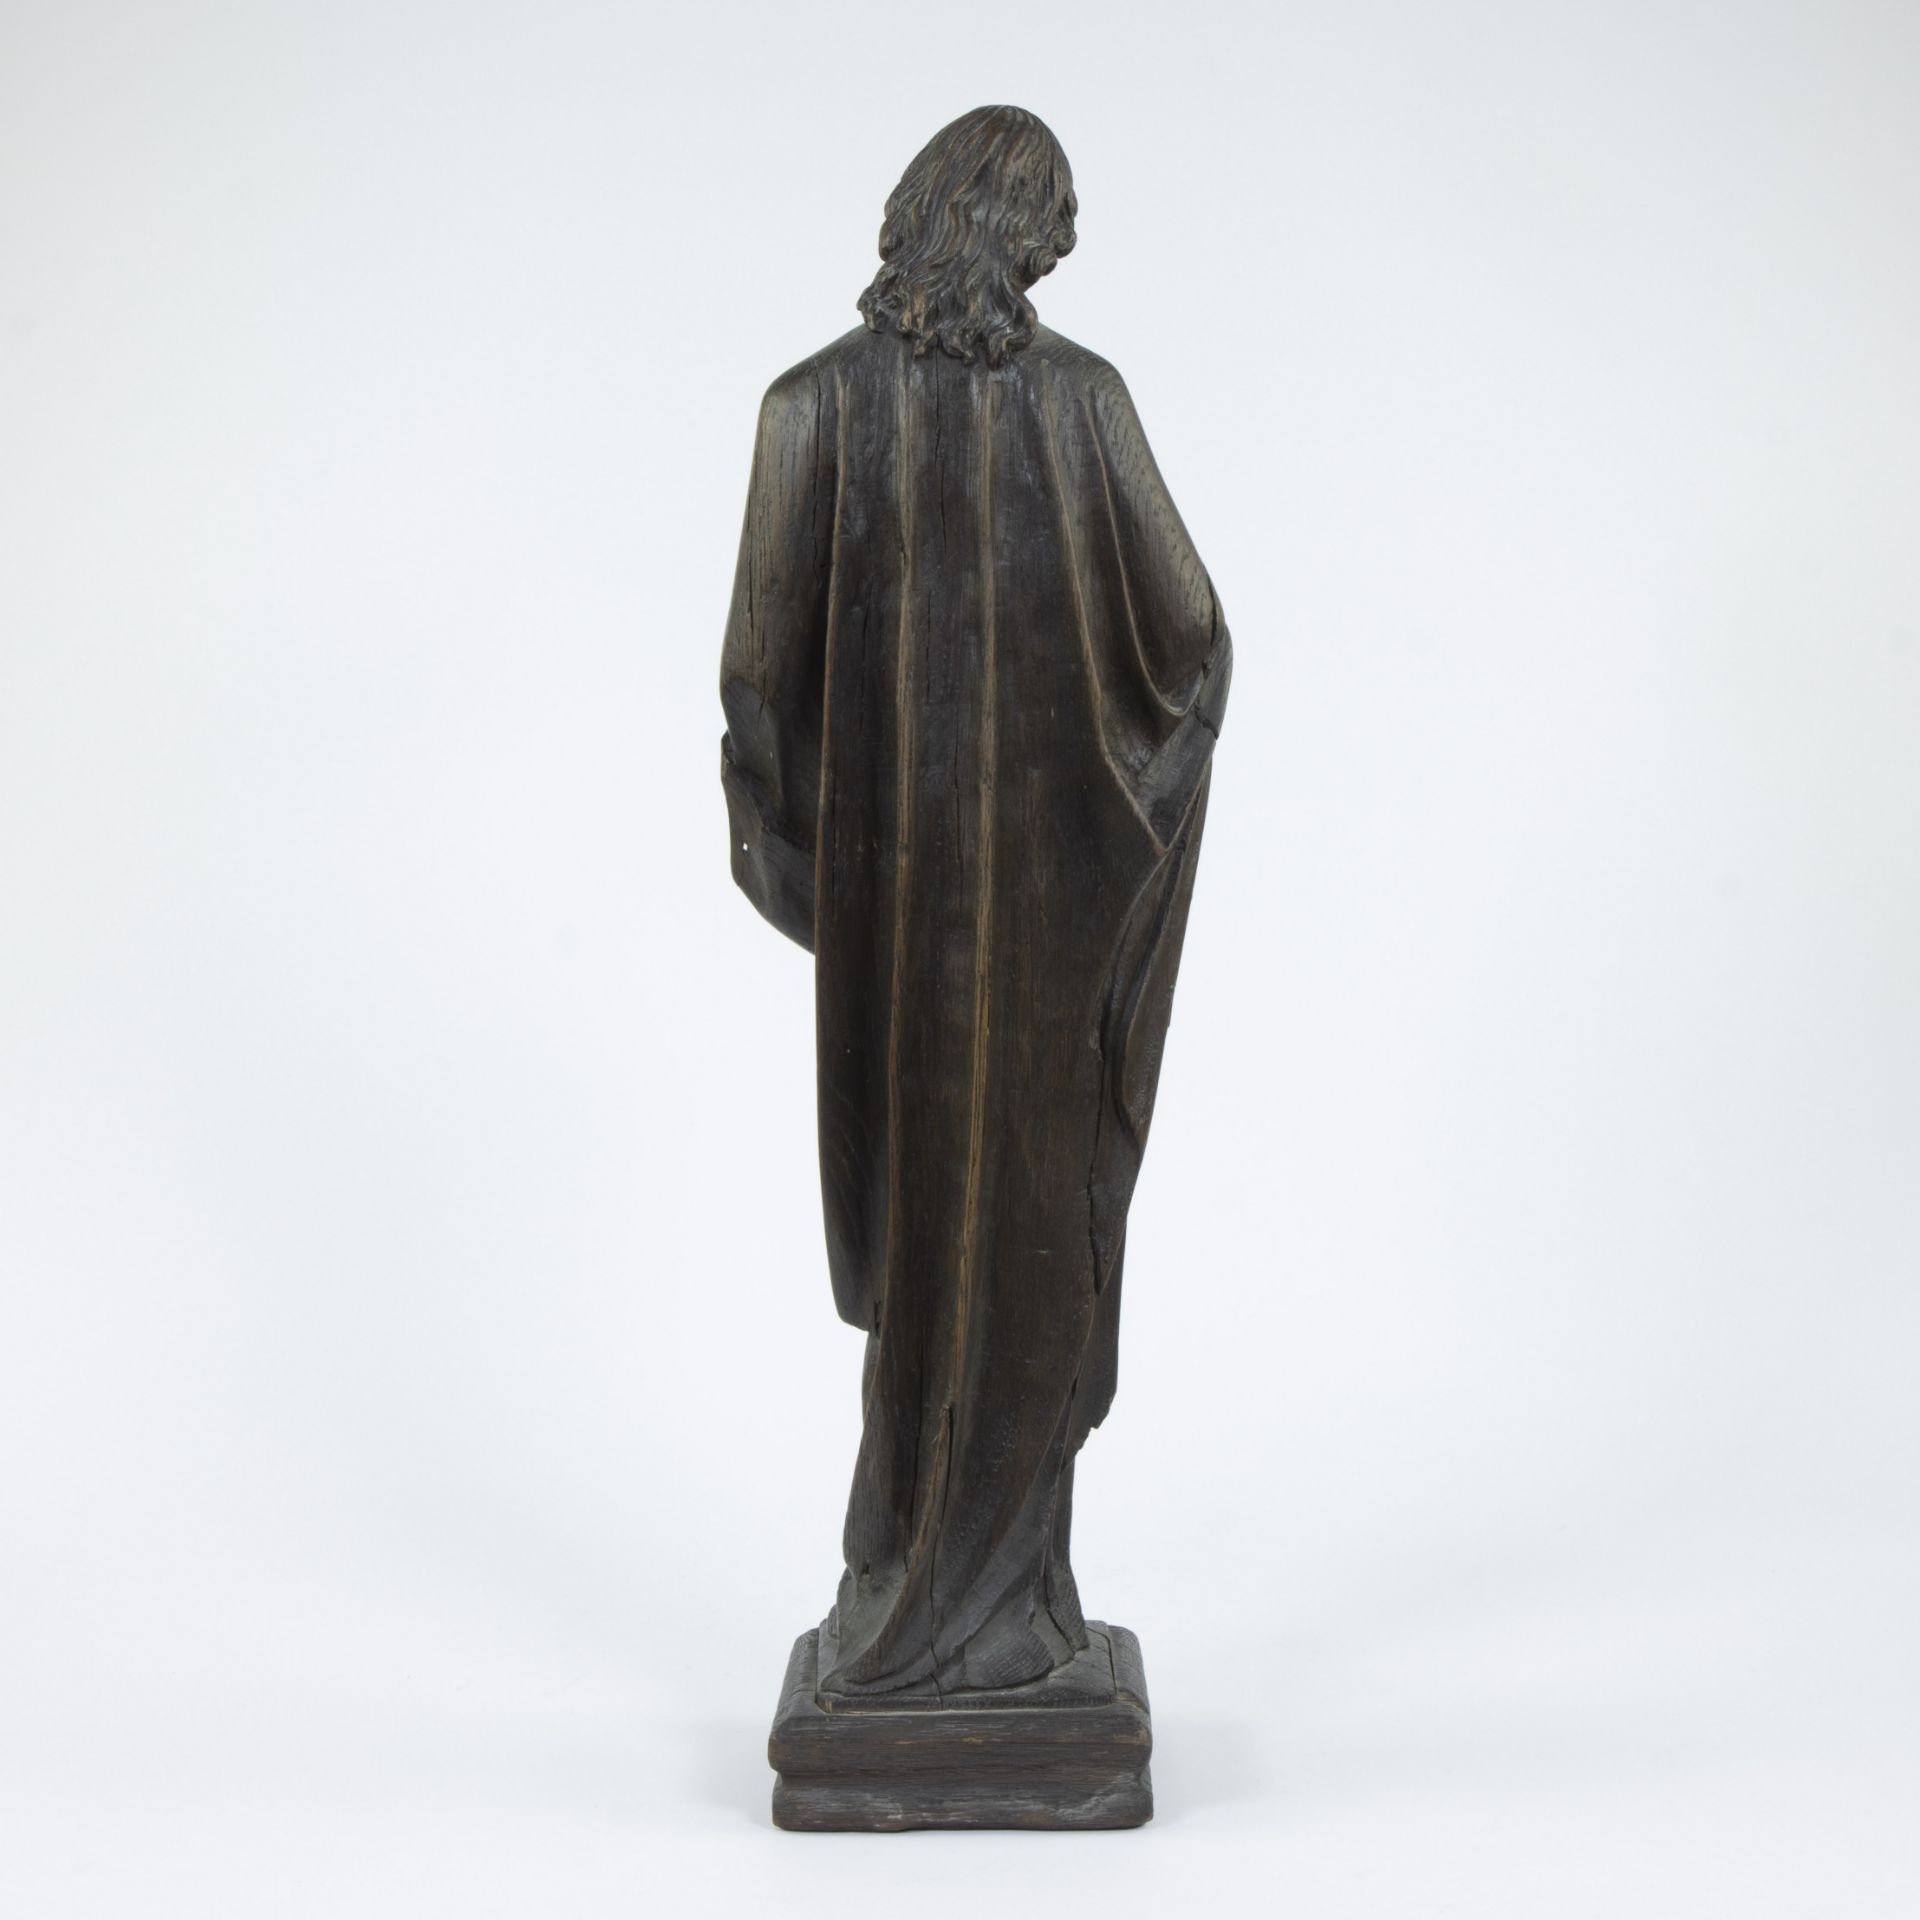 Wooden Neo-Gothic statue of an evangelist with book, 19th century - Image 3 of 4